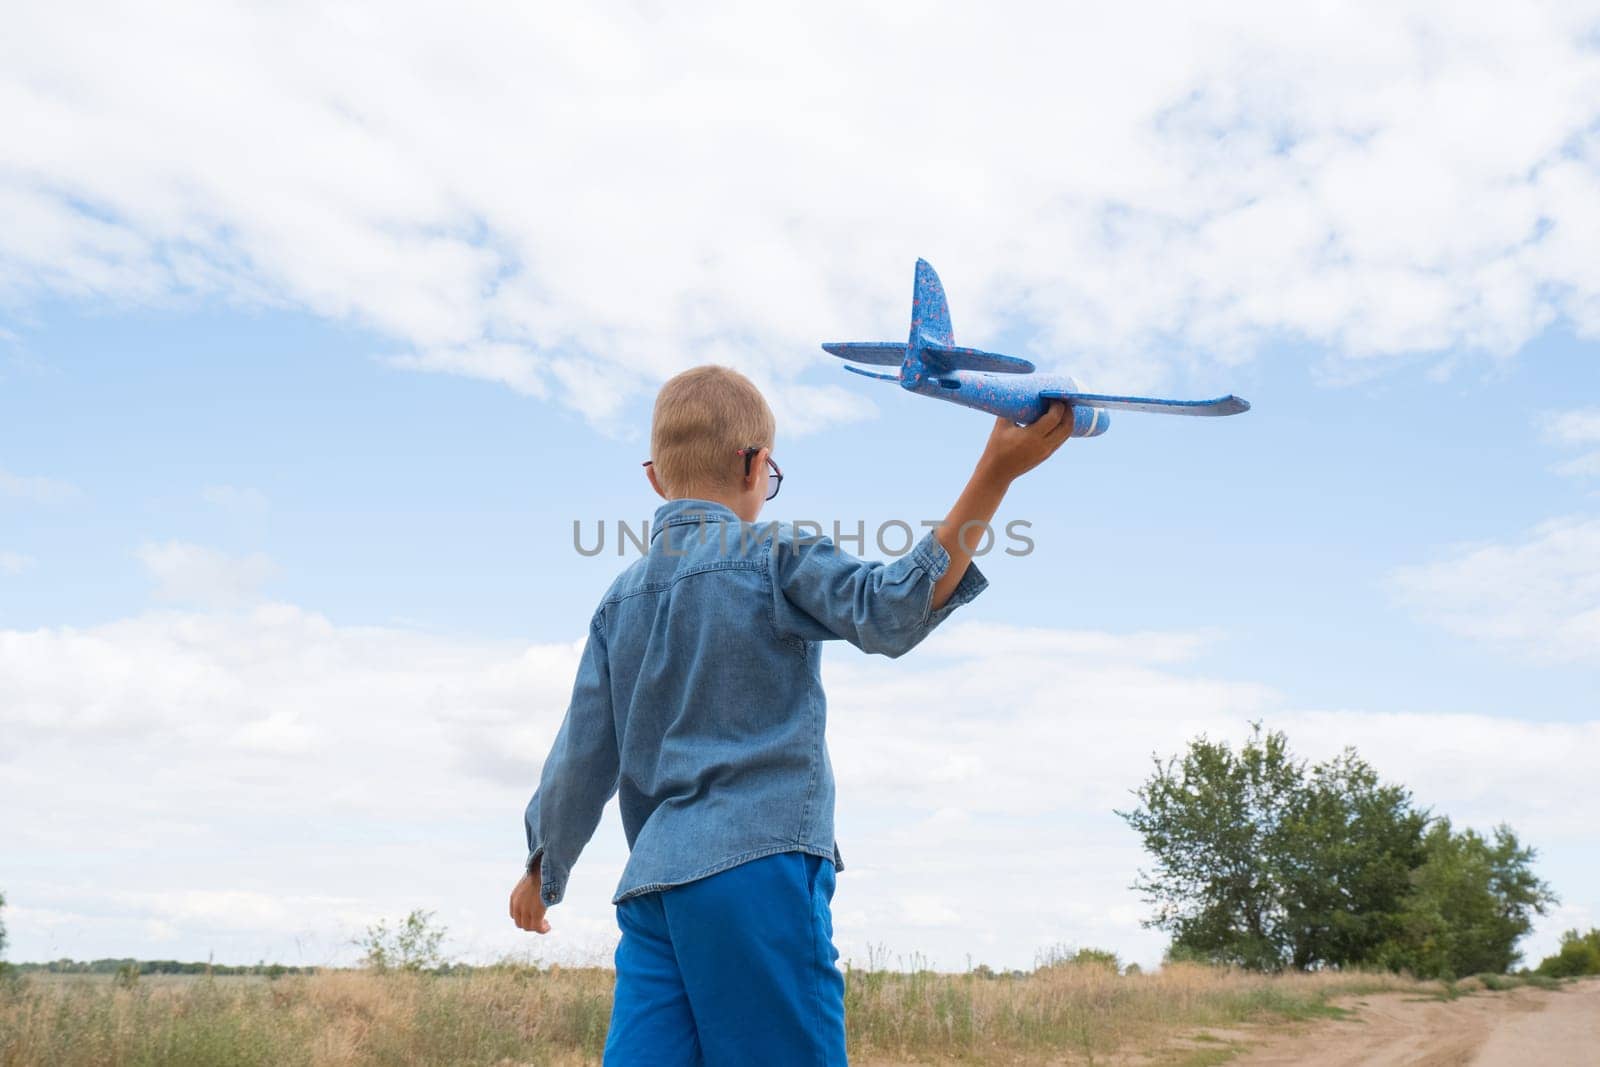 Portrait of a happy child playing with a toy airplane against a blue sky in an open field.